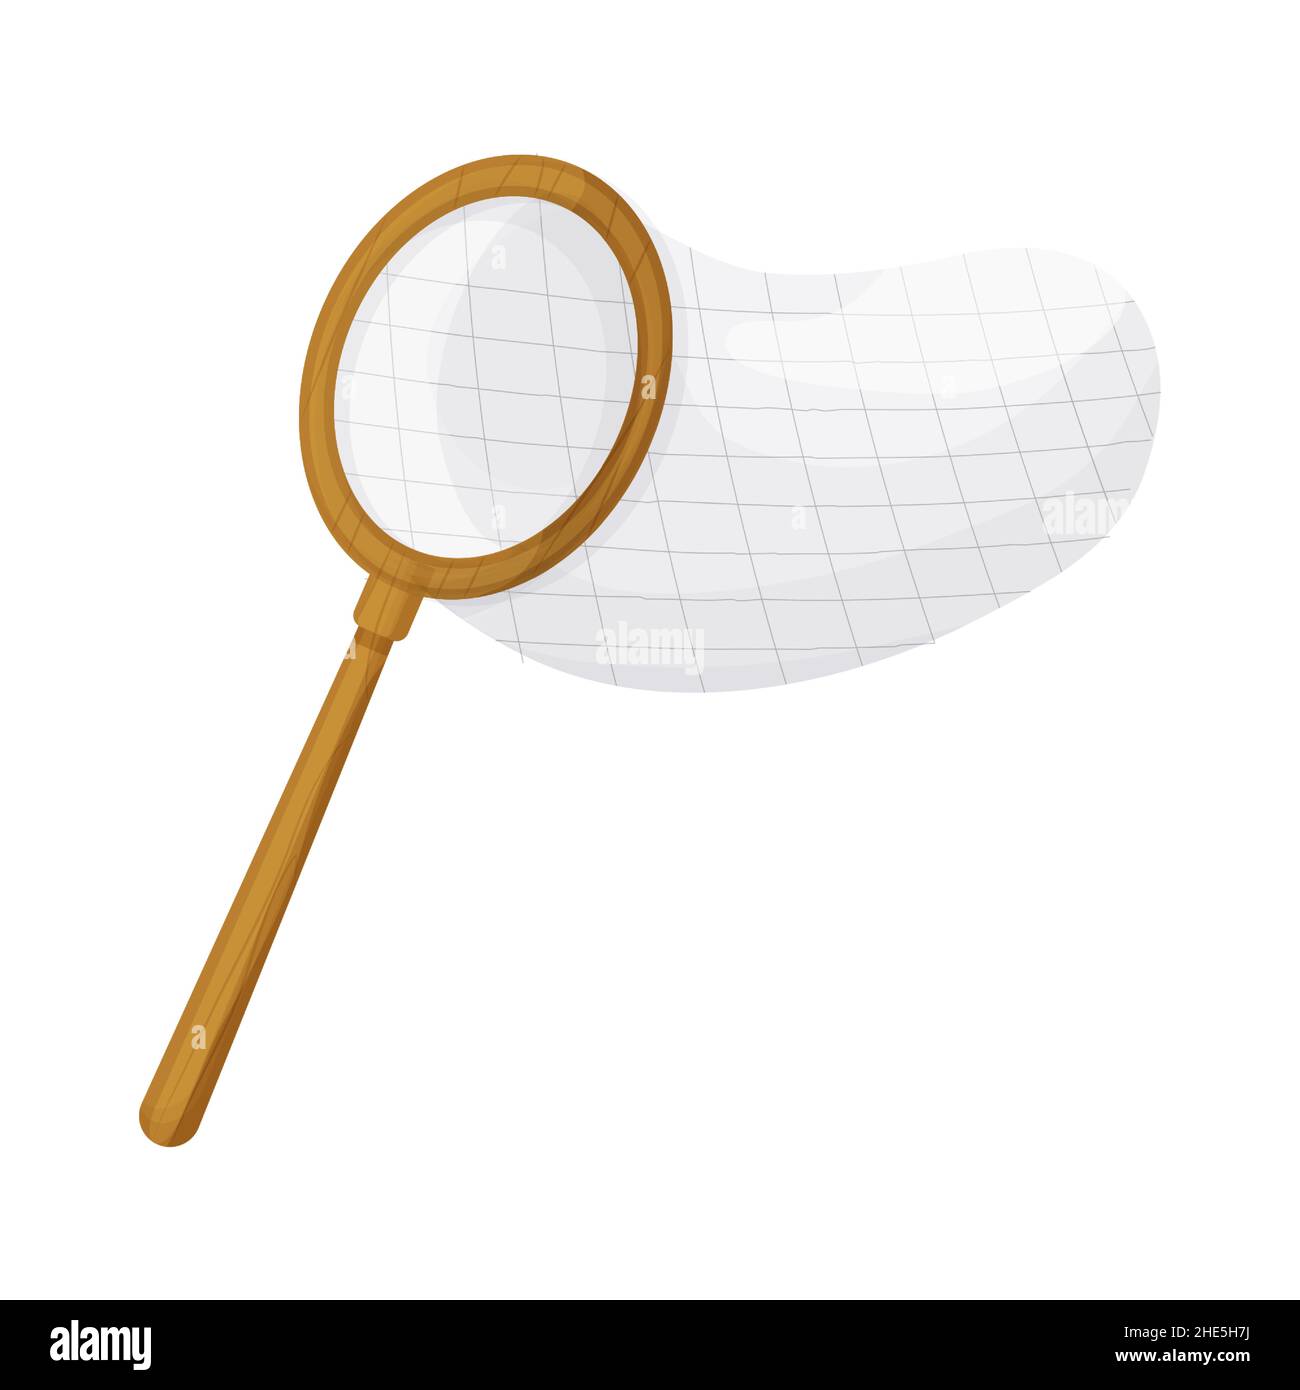 Net with wooden handle butterfly or fish catcher in cartoon style isolated on white background. Equipment for fishing, hobby. Vector illustration Stock Vector